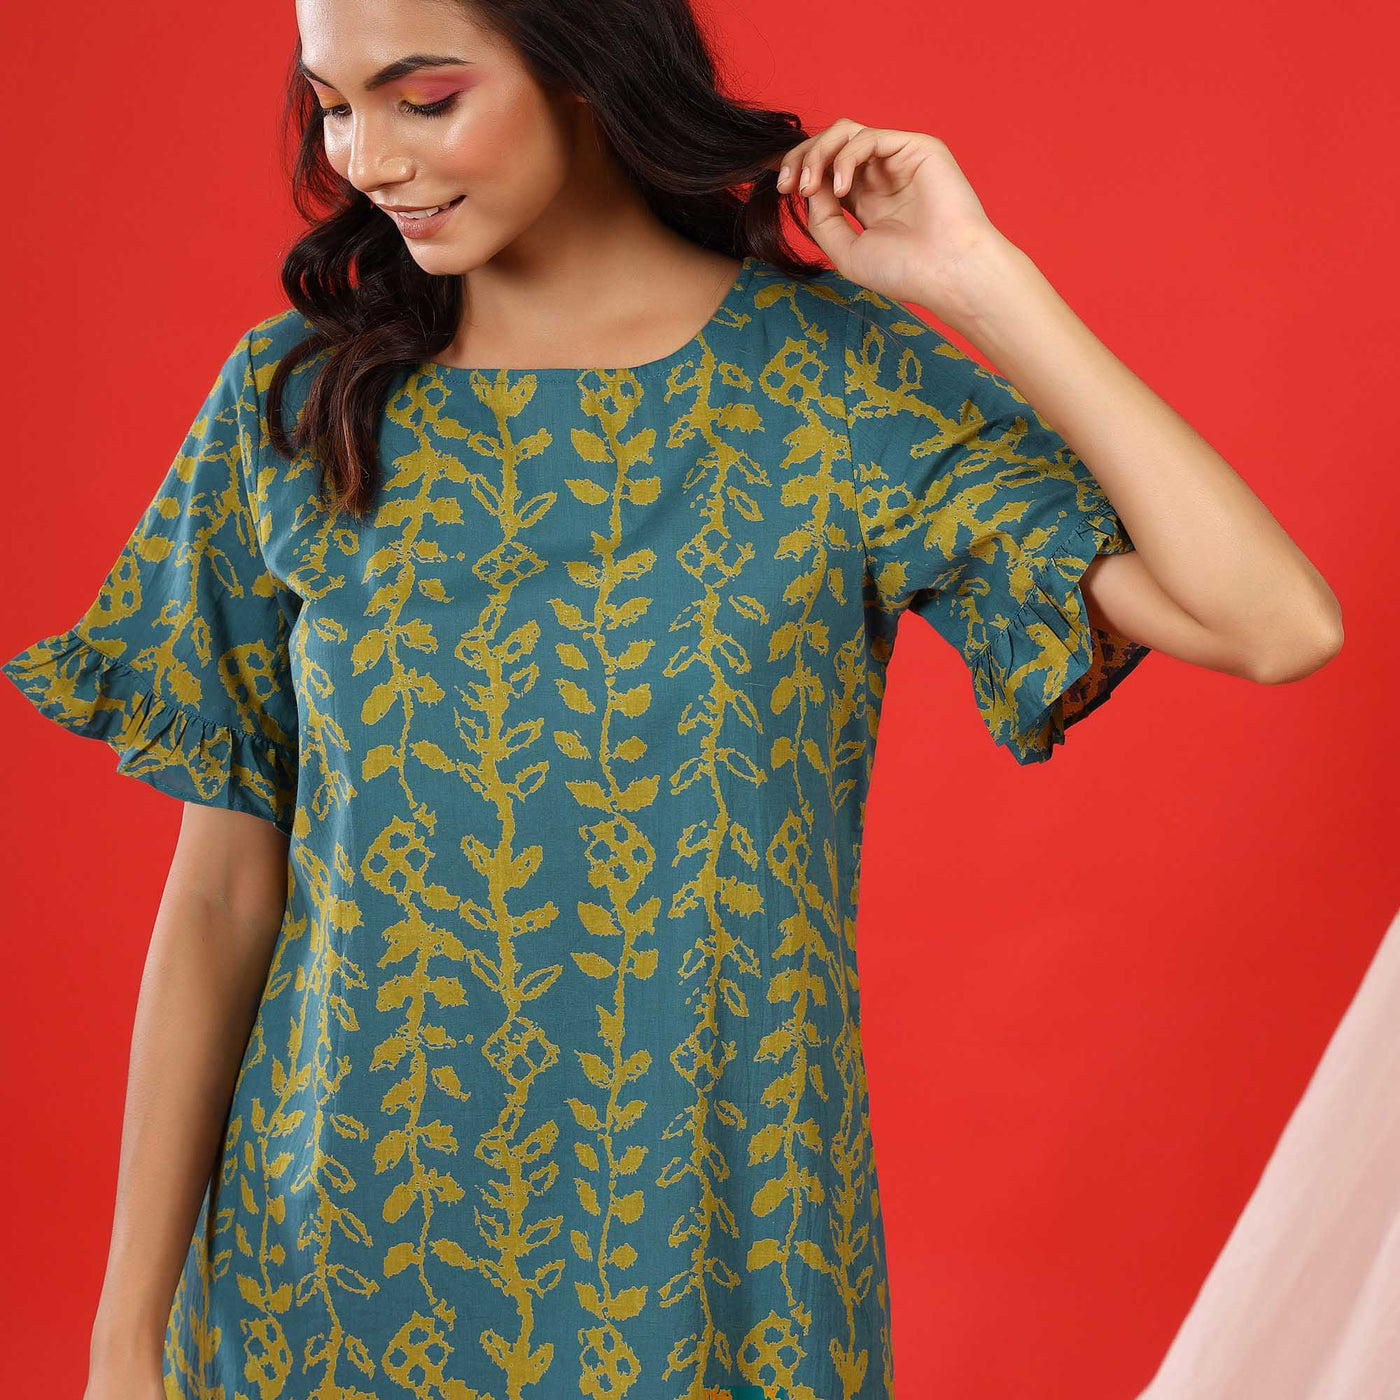 Flowing Leaves on Green T-Shirt Dress